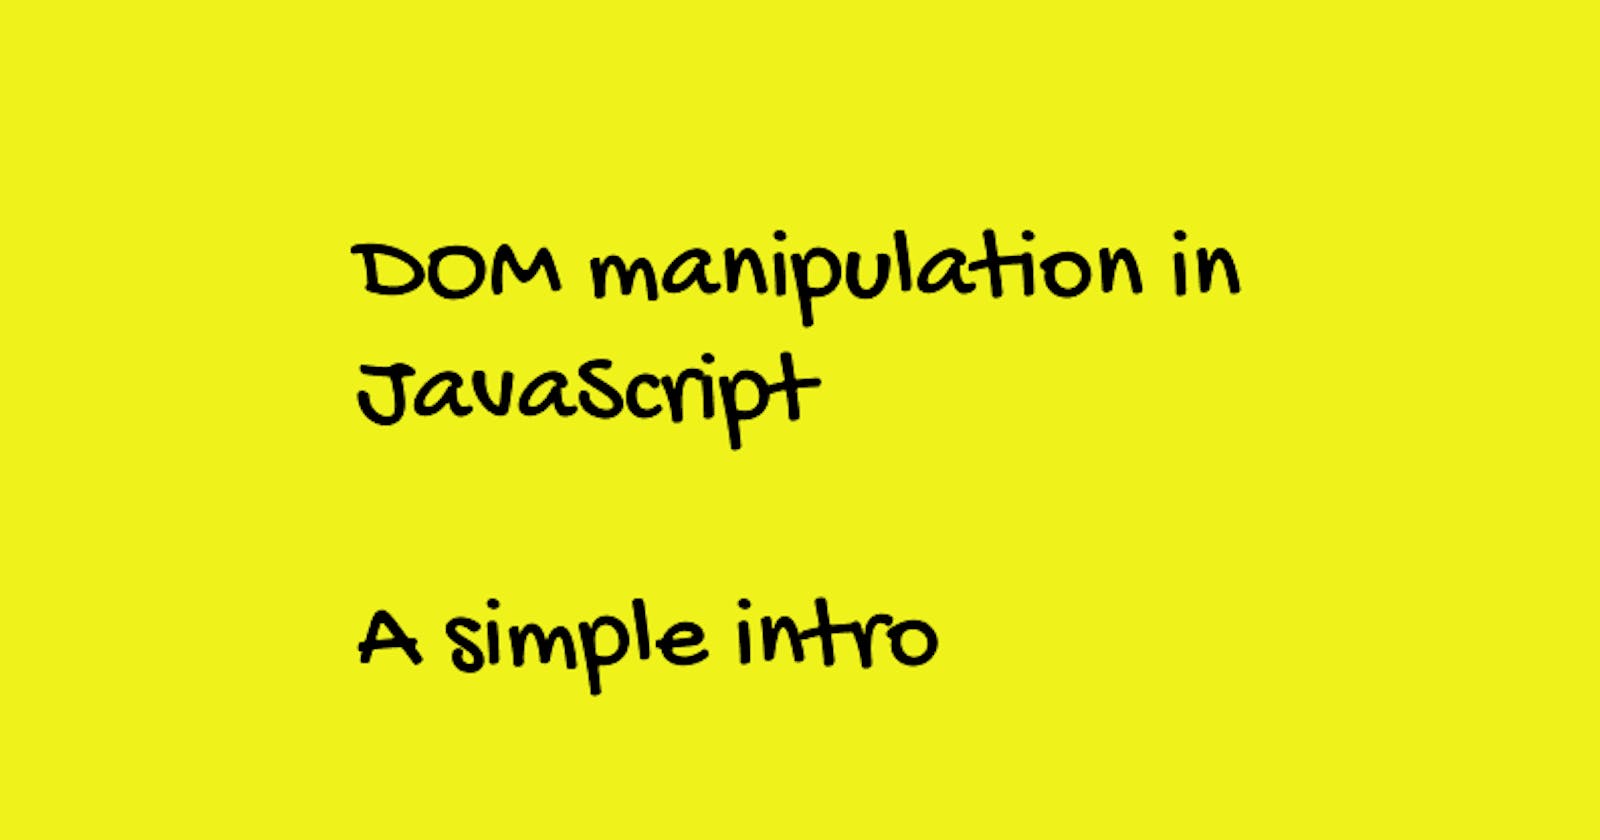 DOM manipulation in JavaScript

A simple intro